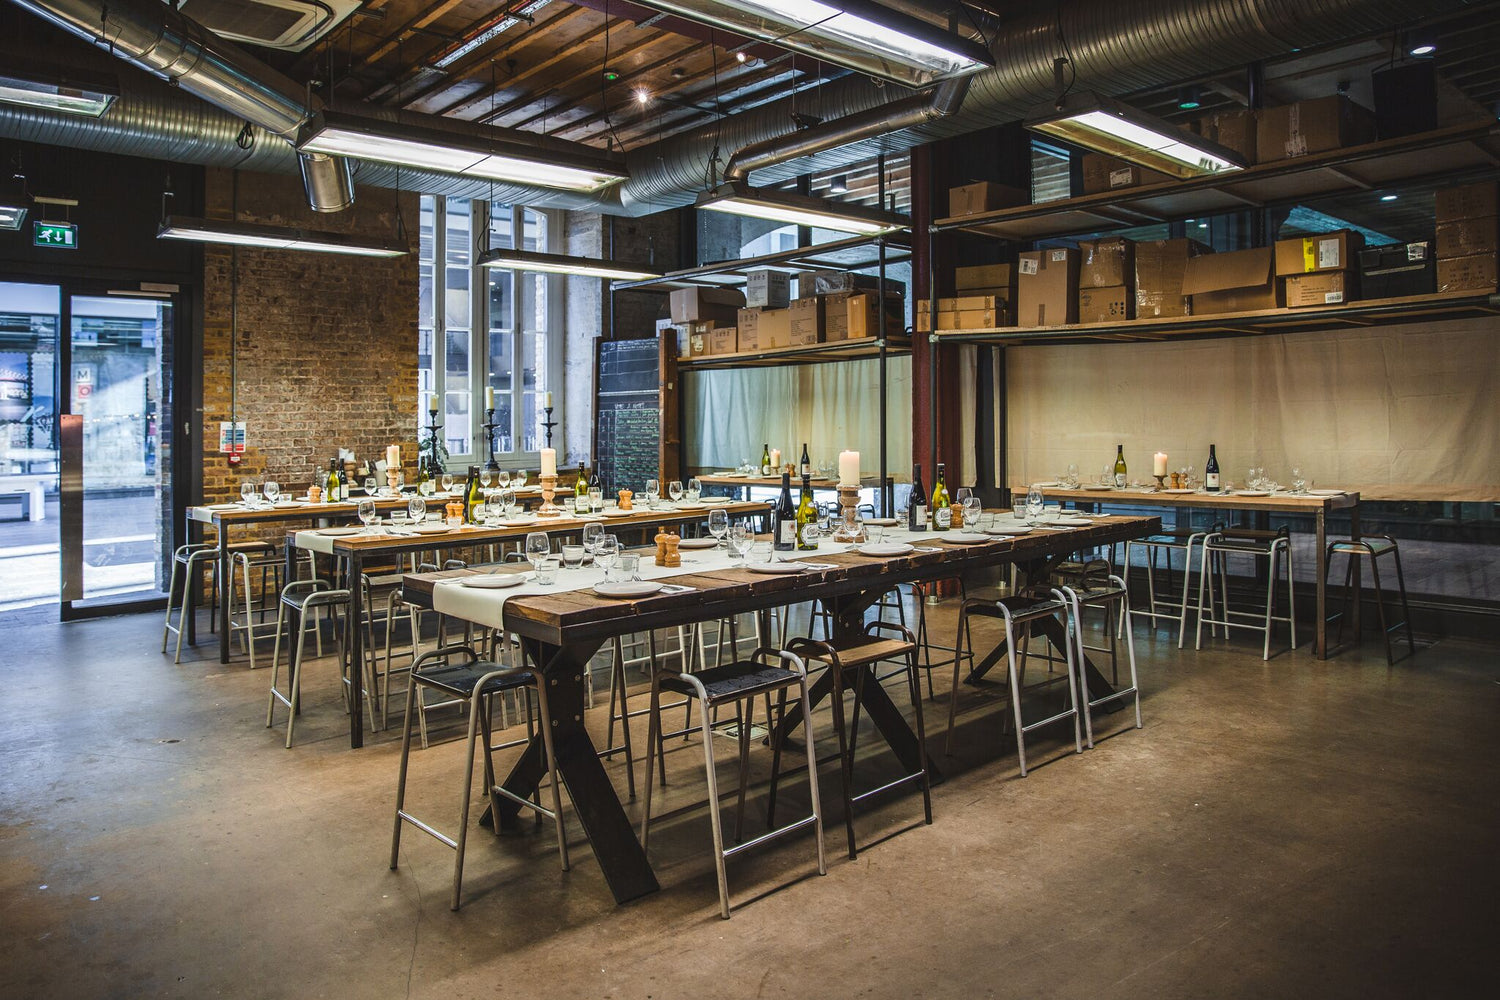 Event space for private hire and group bookings at Caravan King's Cross